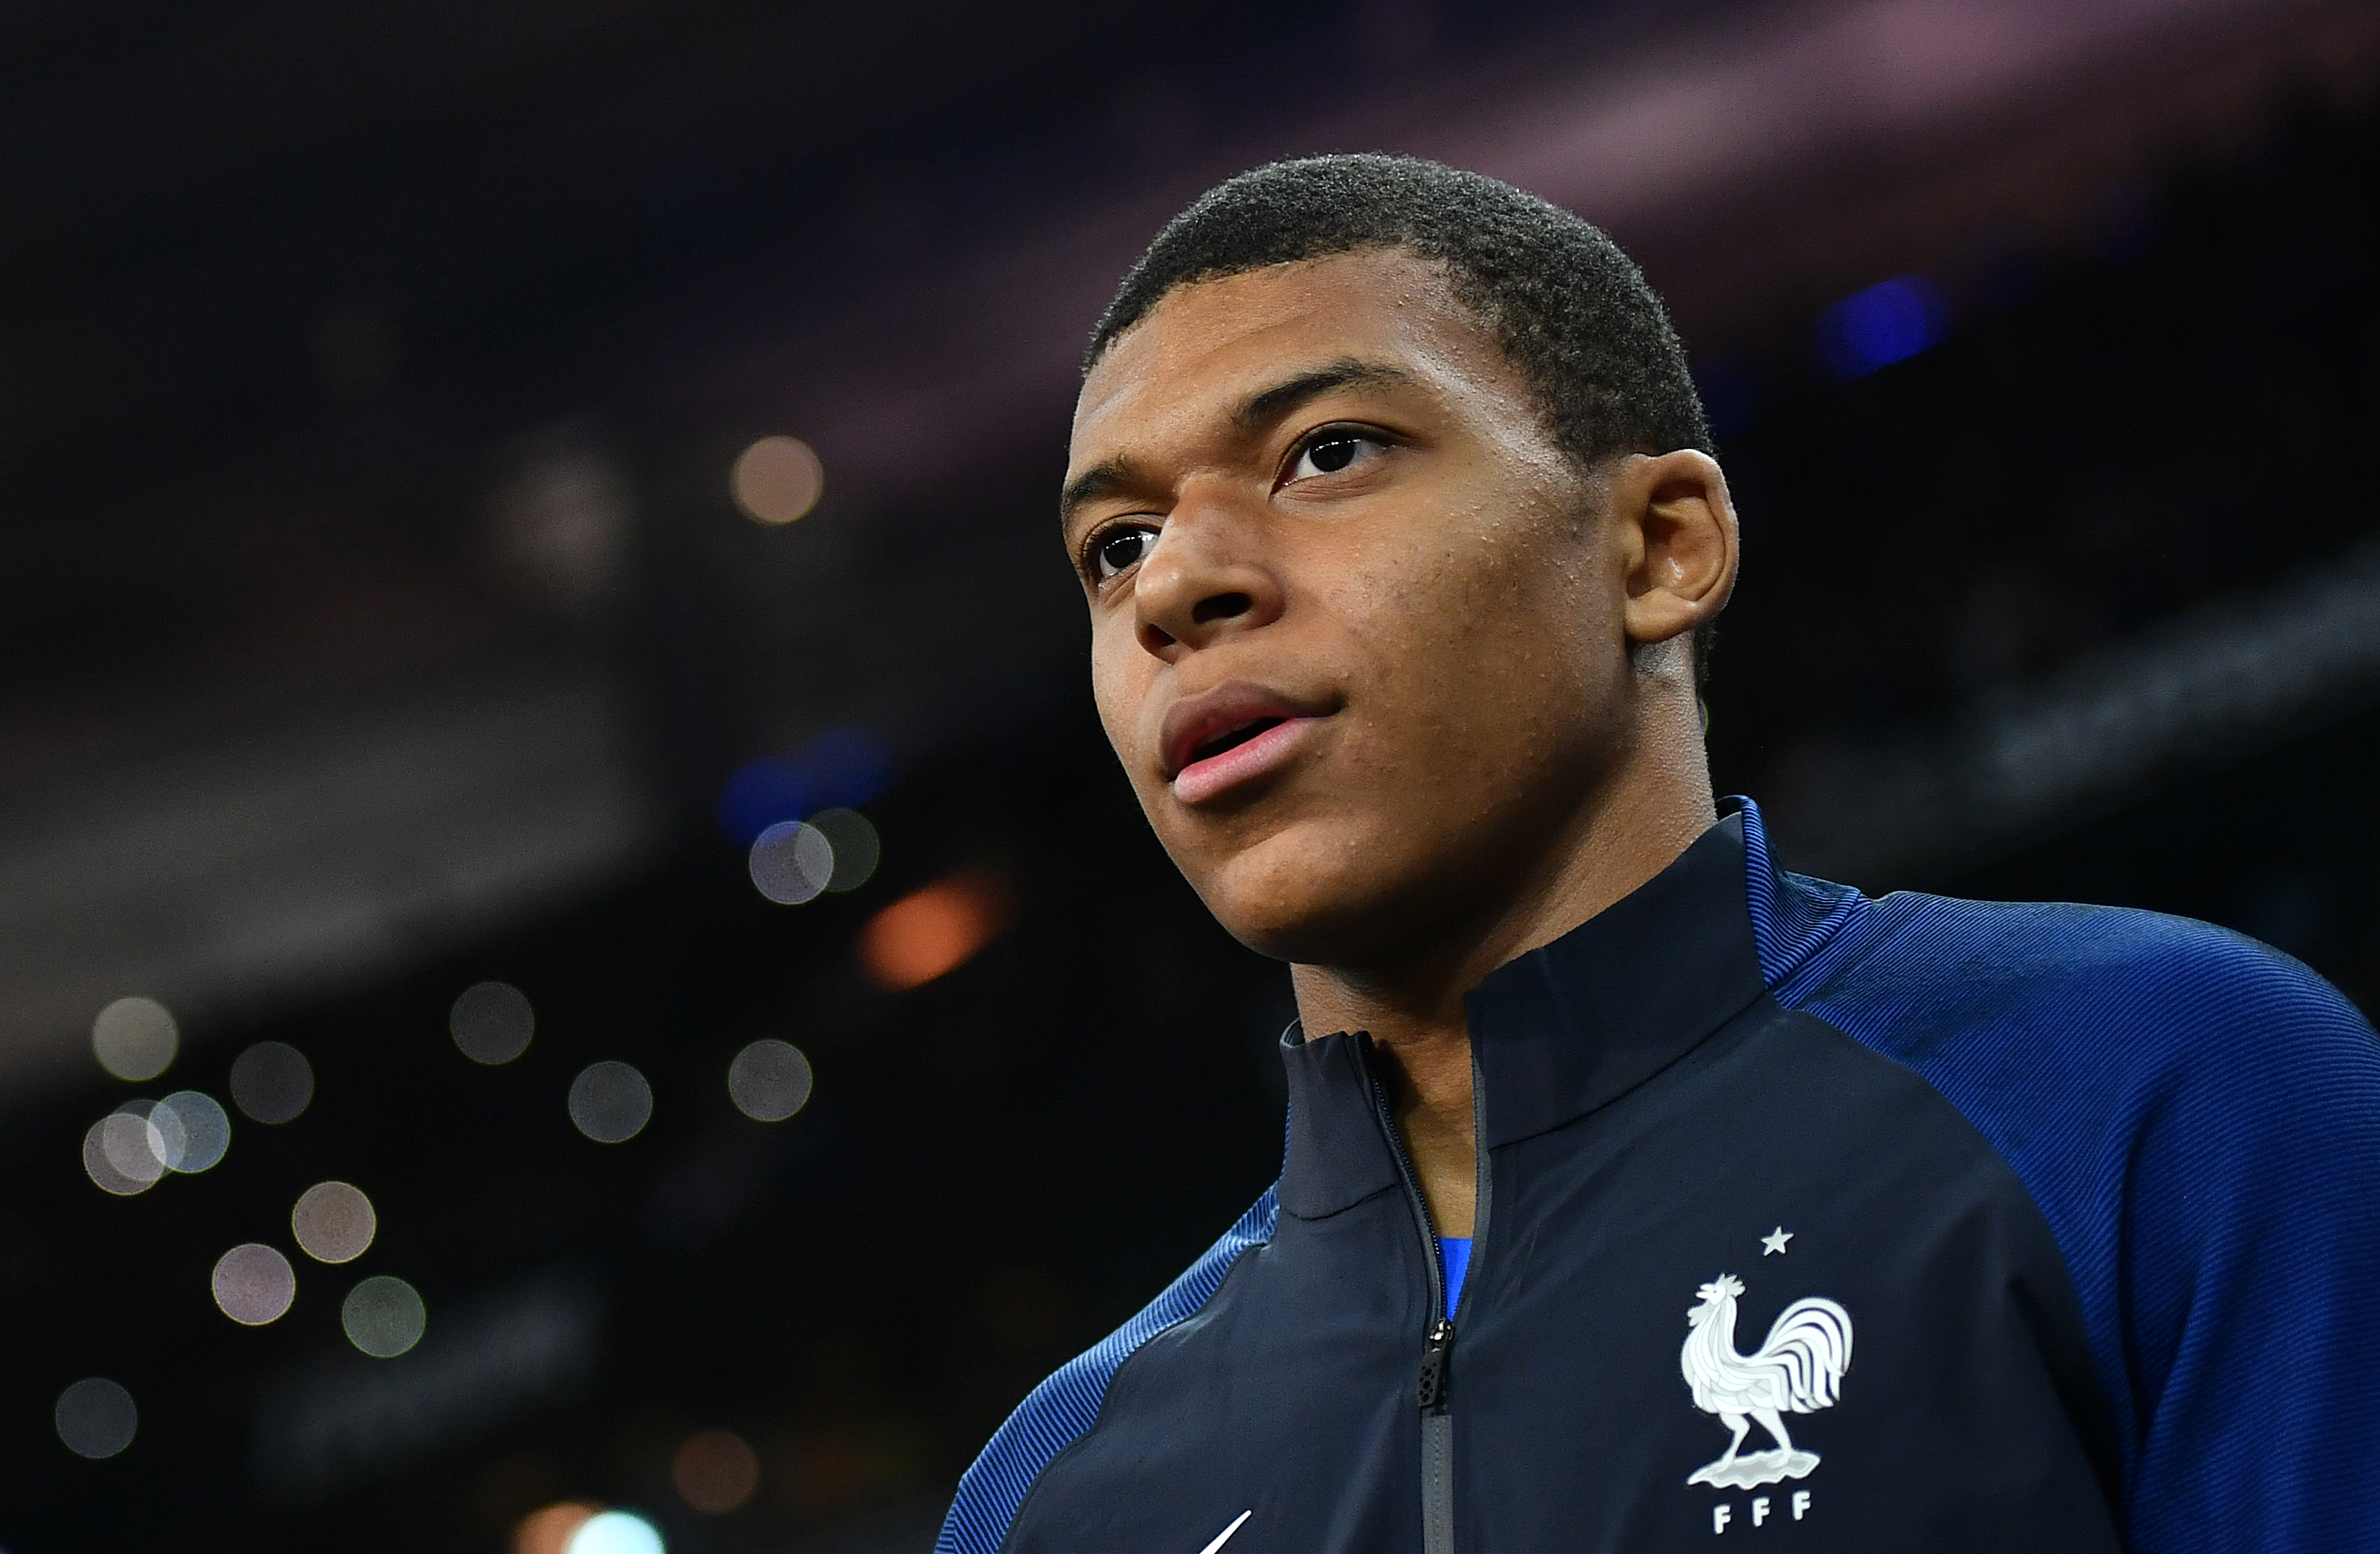 PARIS, FRANCE - MARCH 28:  Kylian Mbappe of France makes his way onto the pitch prior to the International Friendly match between France and Spain at the Stade de France on March 28, 2017 in Paris, France. (Photo by Dan Mullan/Getty Images)